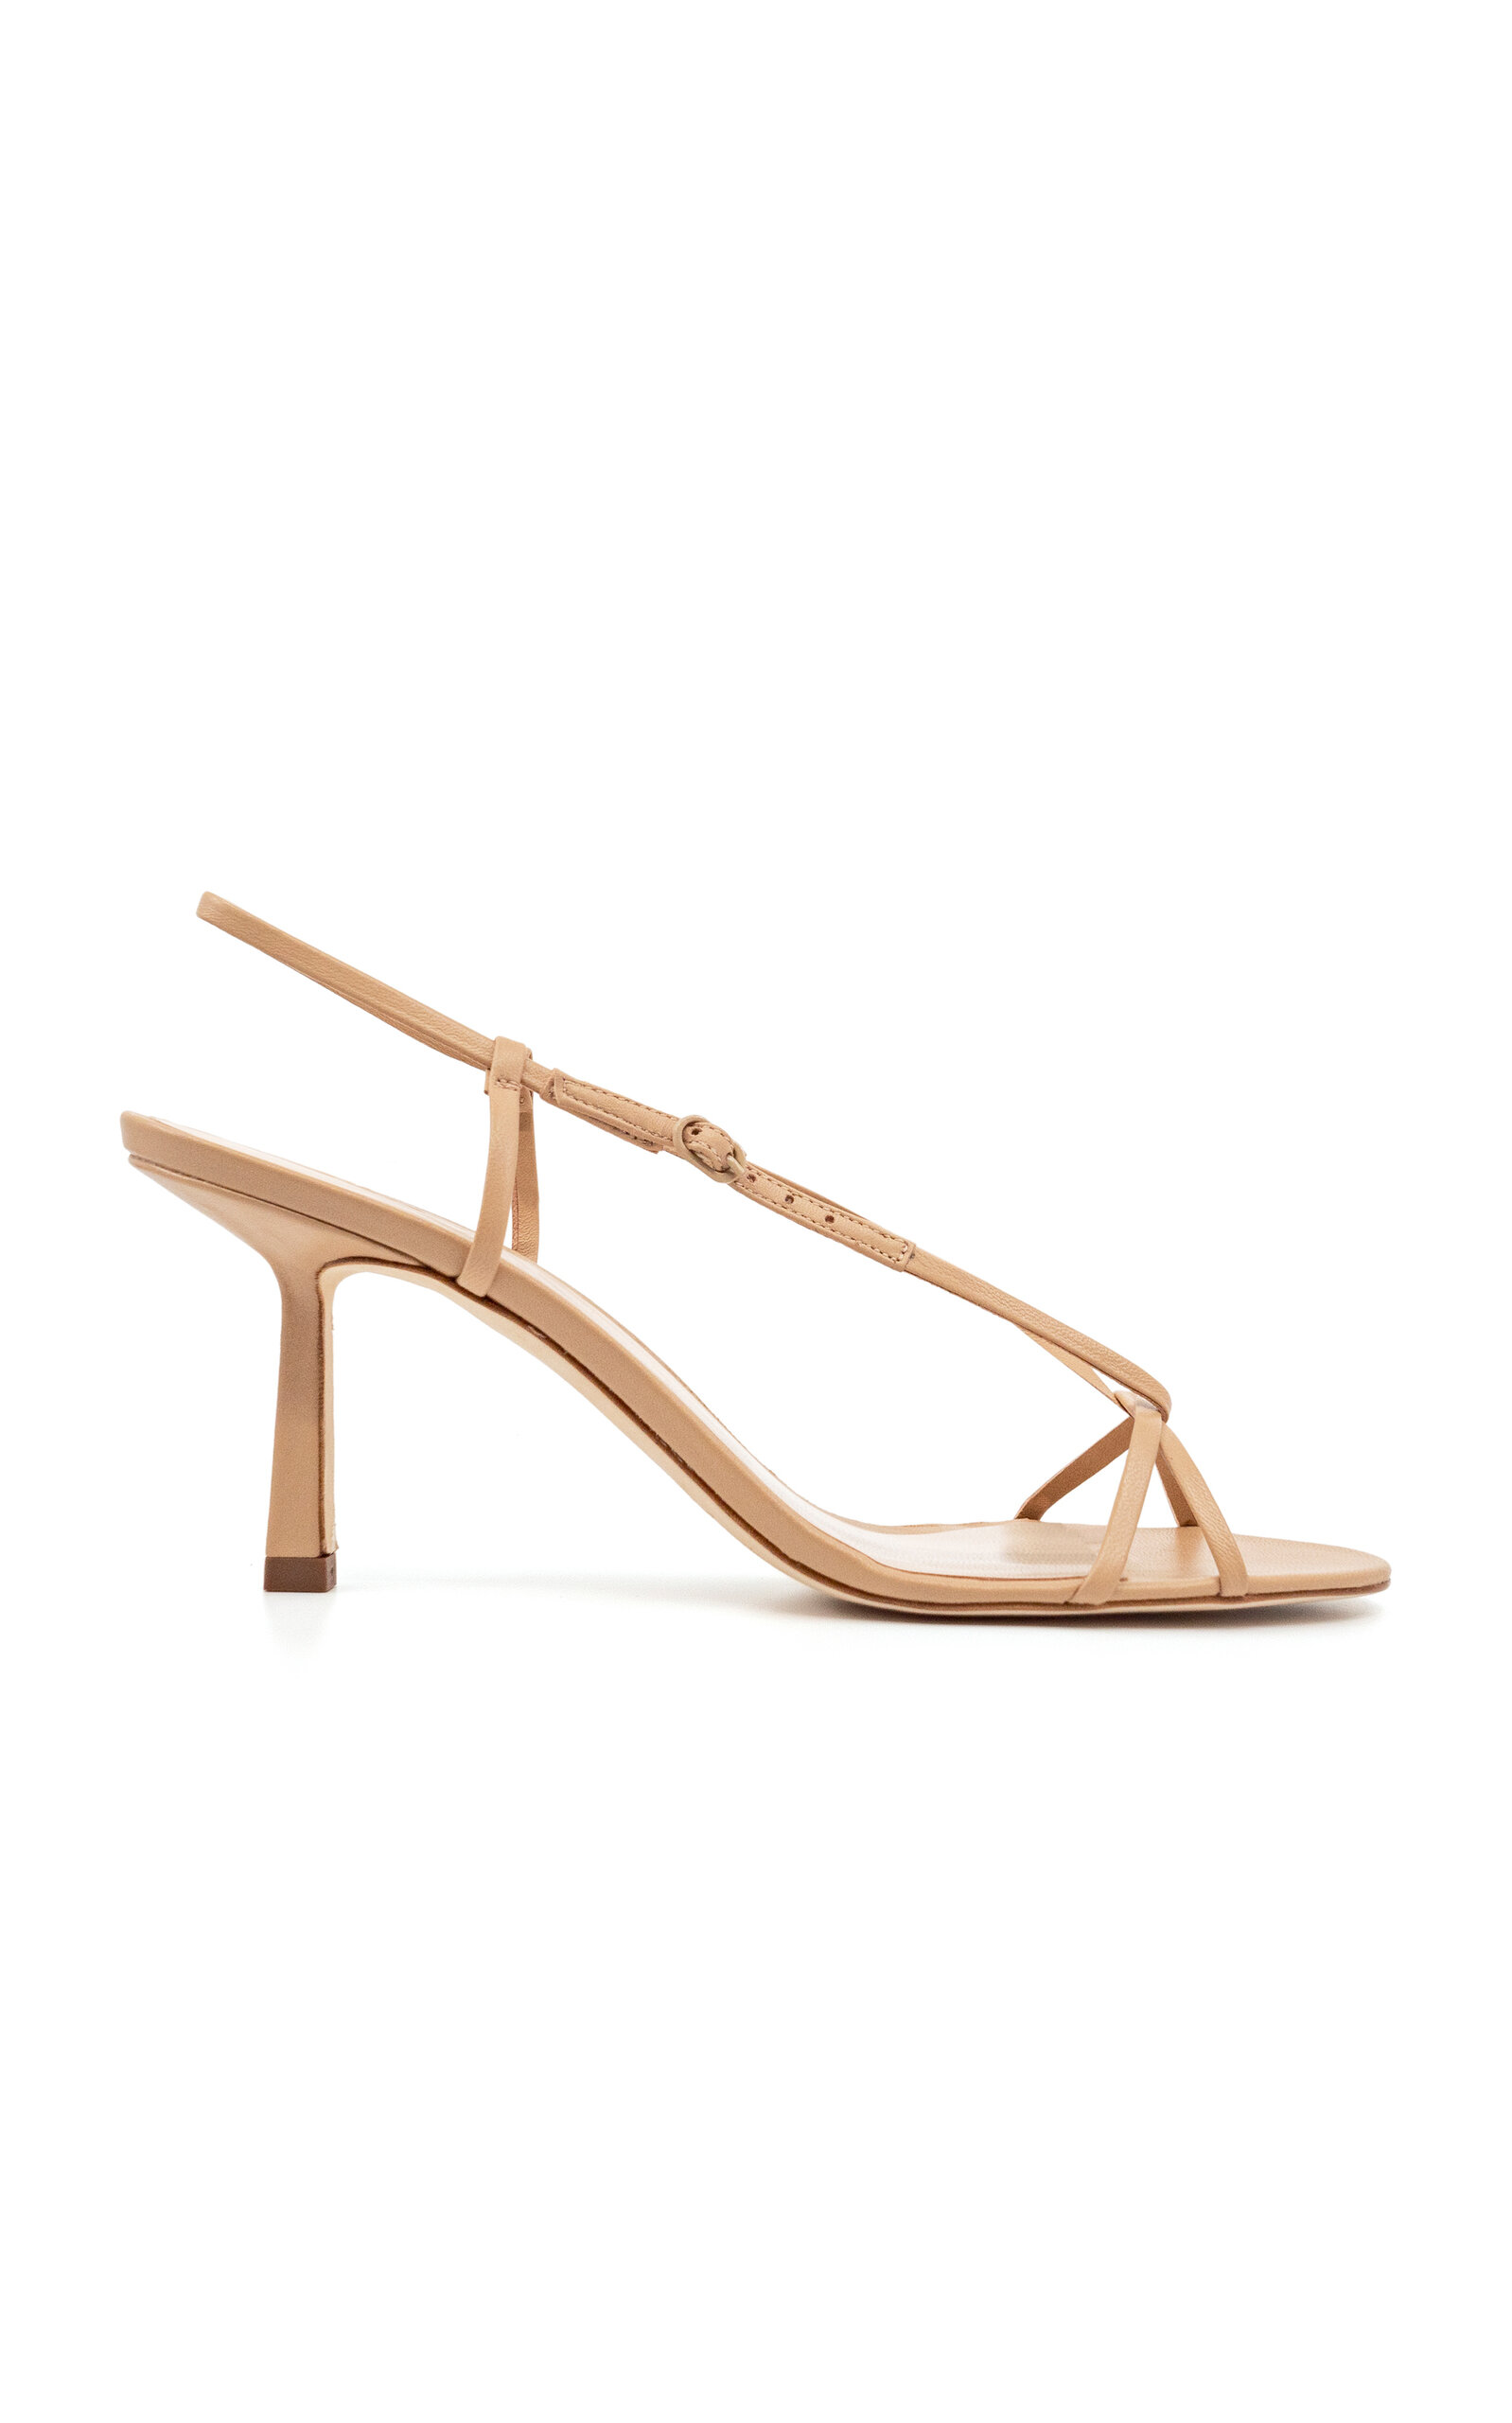 Studio Amelia Entwined Leather Sandals In Nude